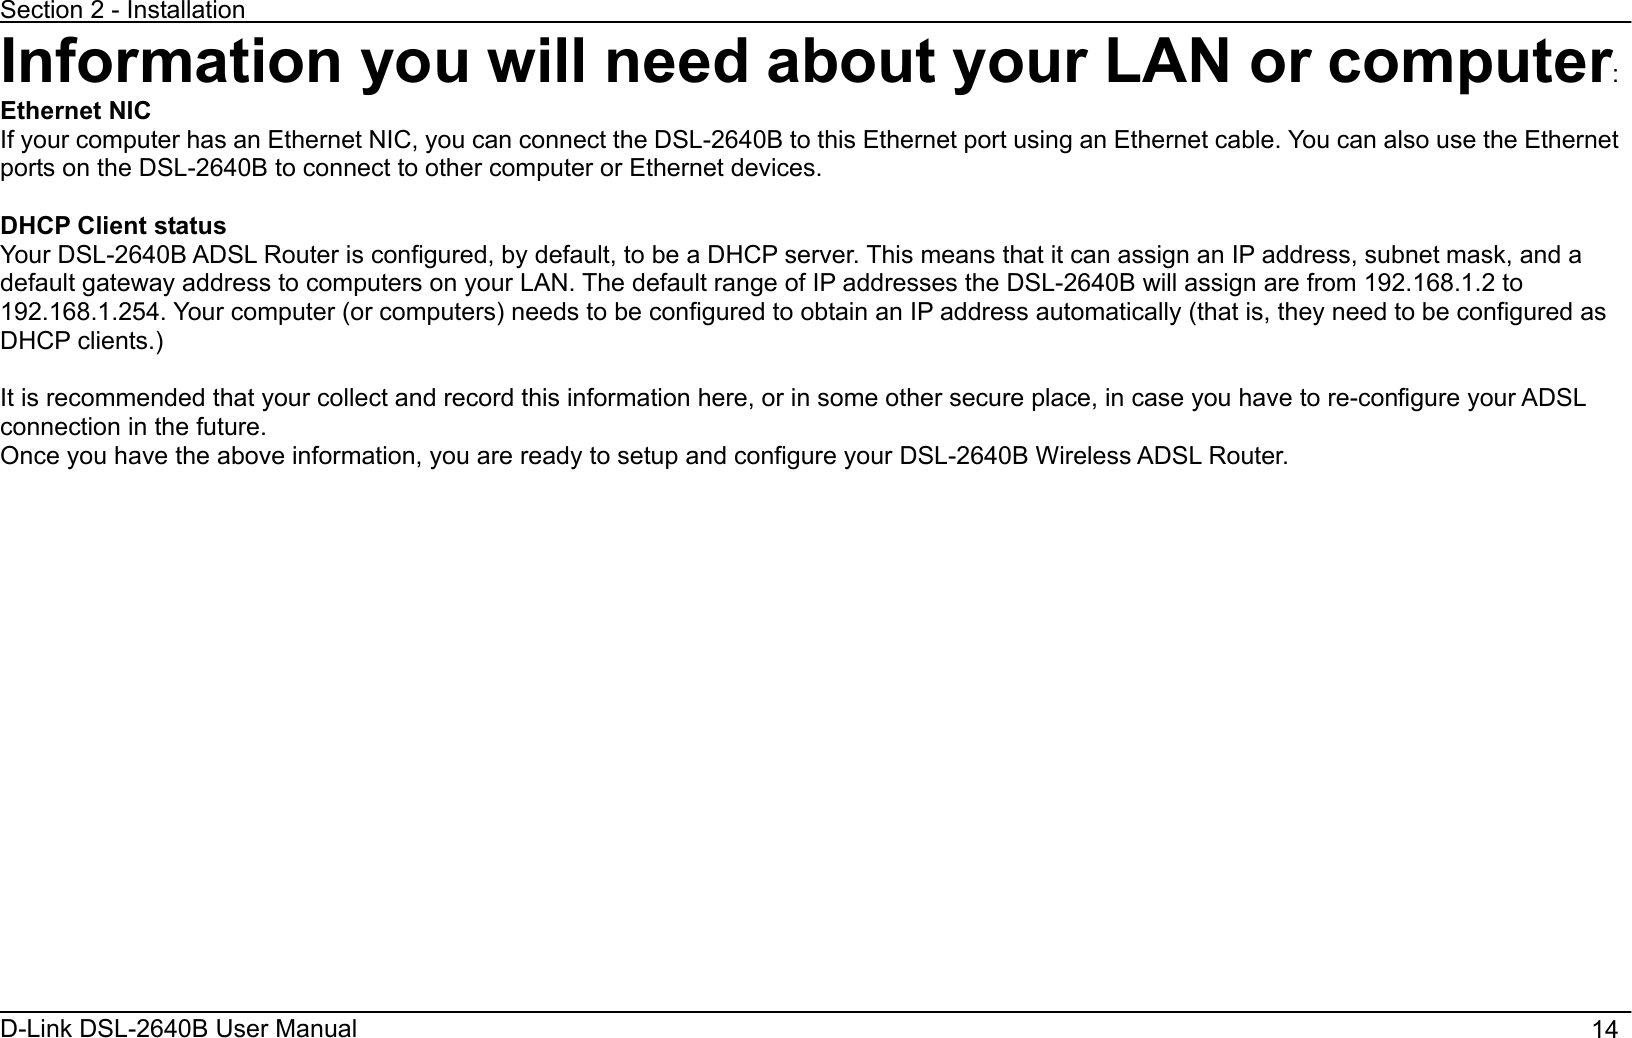 Section 2 - Installation D-Link DSL-2640B User Manual                                       14Information you will need about your LAN or computer:Ethernet NIC If your computer has an Ethernet NIC, you can connect the DSL-2640B to this Ethernet port using an Ethernet cable. You can also use the Ethernet ports on the DSL-2640B to connect to other computer or Ethernet devices. DHCP Client status Your DSL-2640B ADSL Router is configured, by default, to be a DHCP server. This means that it can assign an IP address, subnet mask, and a default gateway address to computers on your LAN. The default range of IP addresses the DSL-2640B will assign are from 192.168.1.2 to 192.168.1.254. Your computer (or computers) needs to be configured to obtain an IP address automatically (that is, they need to be configured as DHCP clients.)     It is recommended that your collect and record this information here, or in some other secure place, in case you have to re-configure your ADSL connection in the future. Once you have the above information, you are ready to setup and configure your DSL-2640B Wireless ADSL Router. 